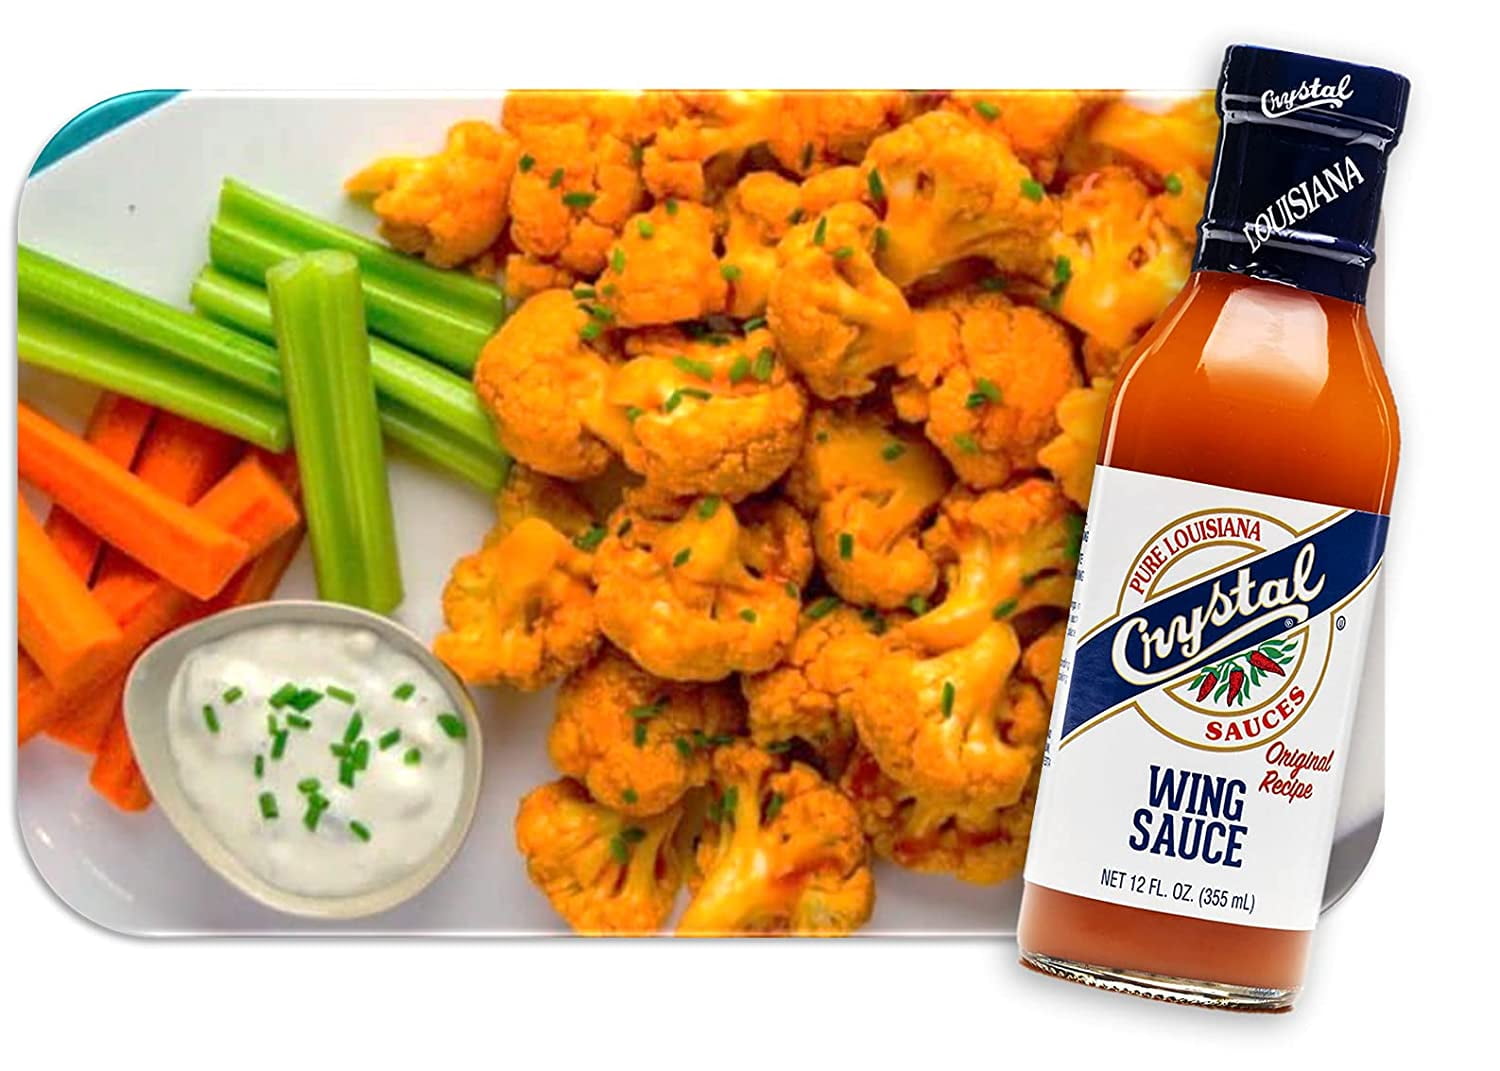 .com: Crystal Hot Sauce Louisiana Original (Pack of 3). 12 fl oz  Bottle (2 Count) + 3 fl oz TO GO BOTTLE (1 Count). Conveniently Packed in  Crushproof Gift Box. Gluten-Free, Vegan